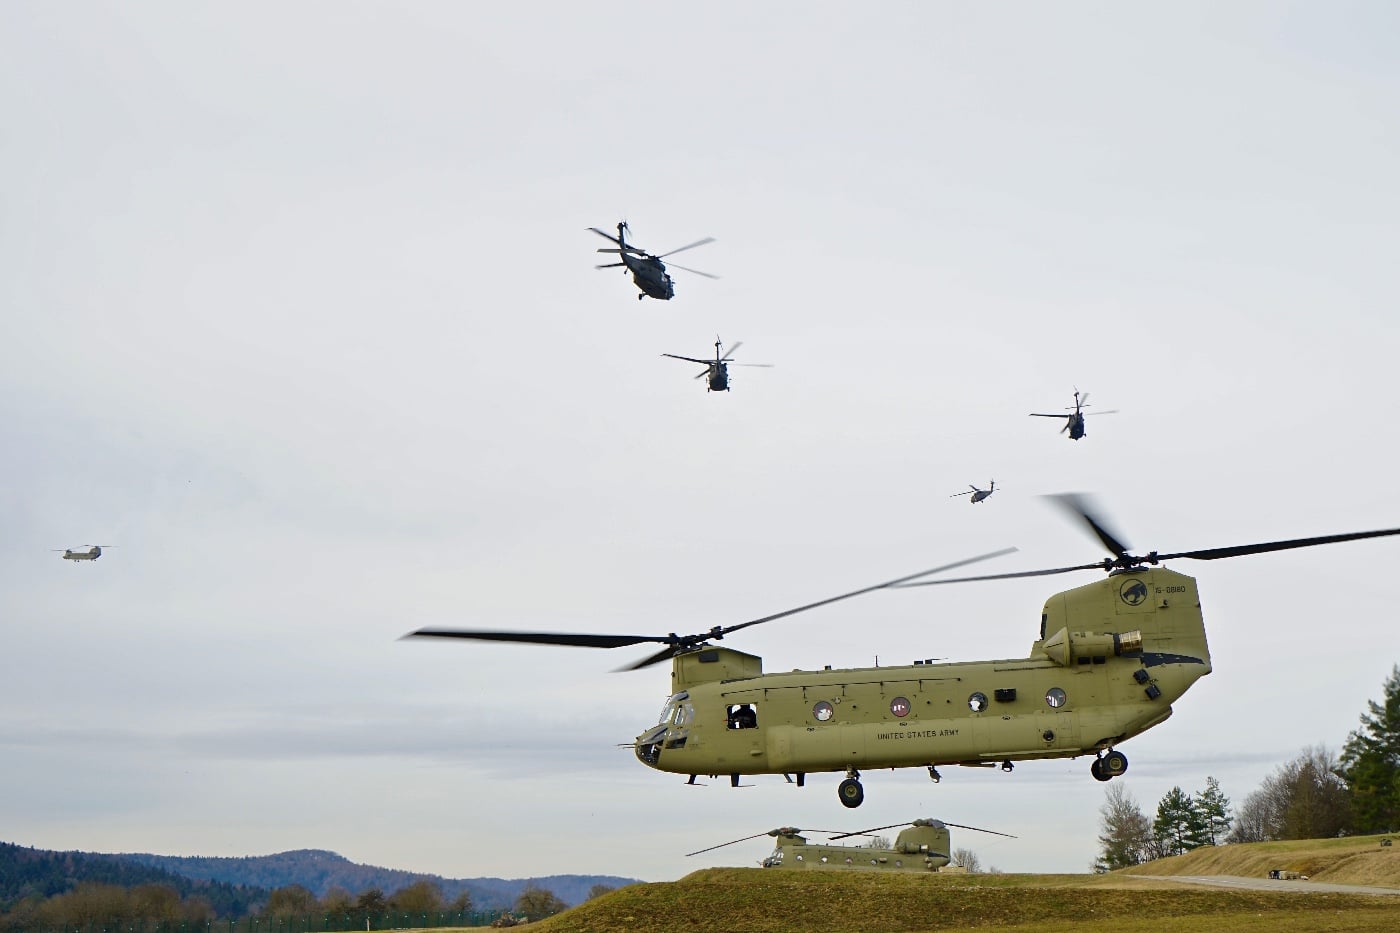 ch-47 helicopters in training with uh-60 blackhawks